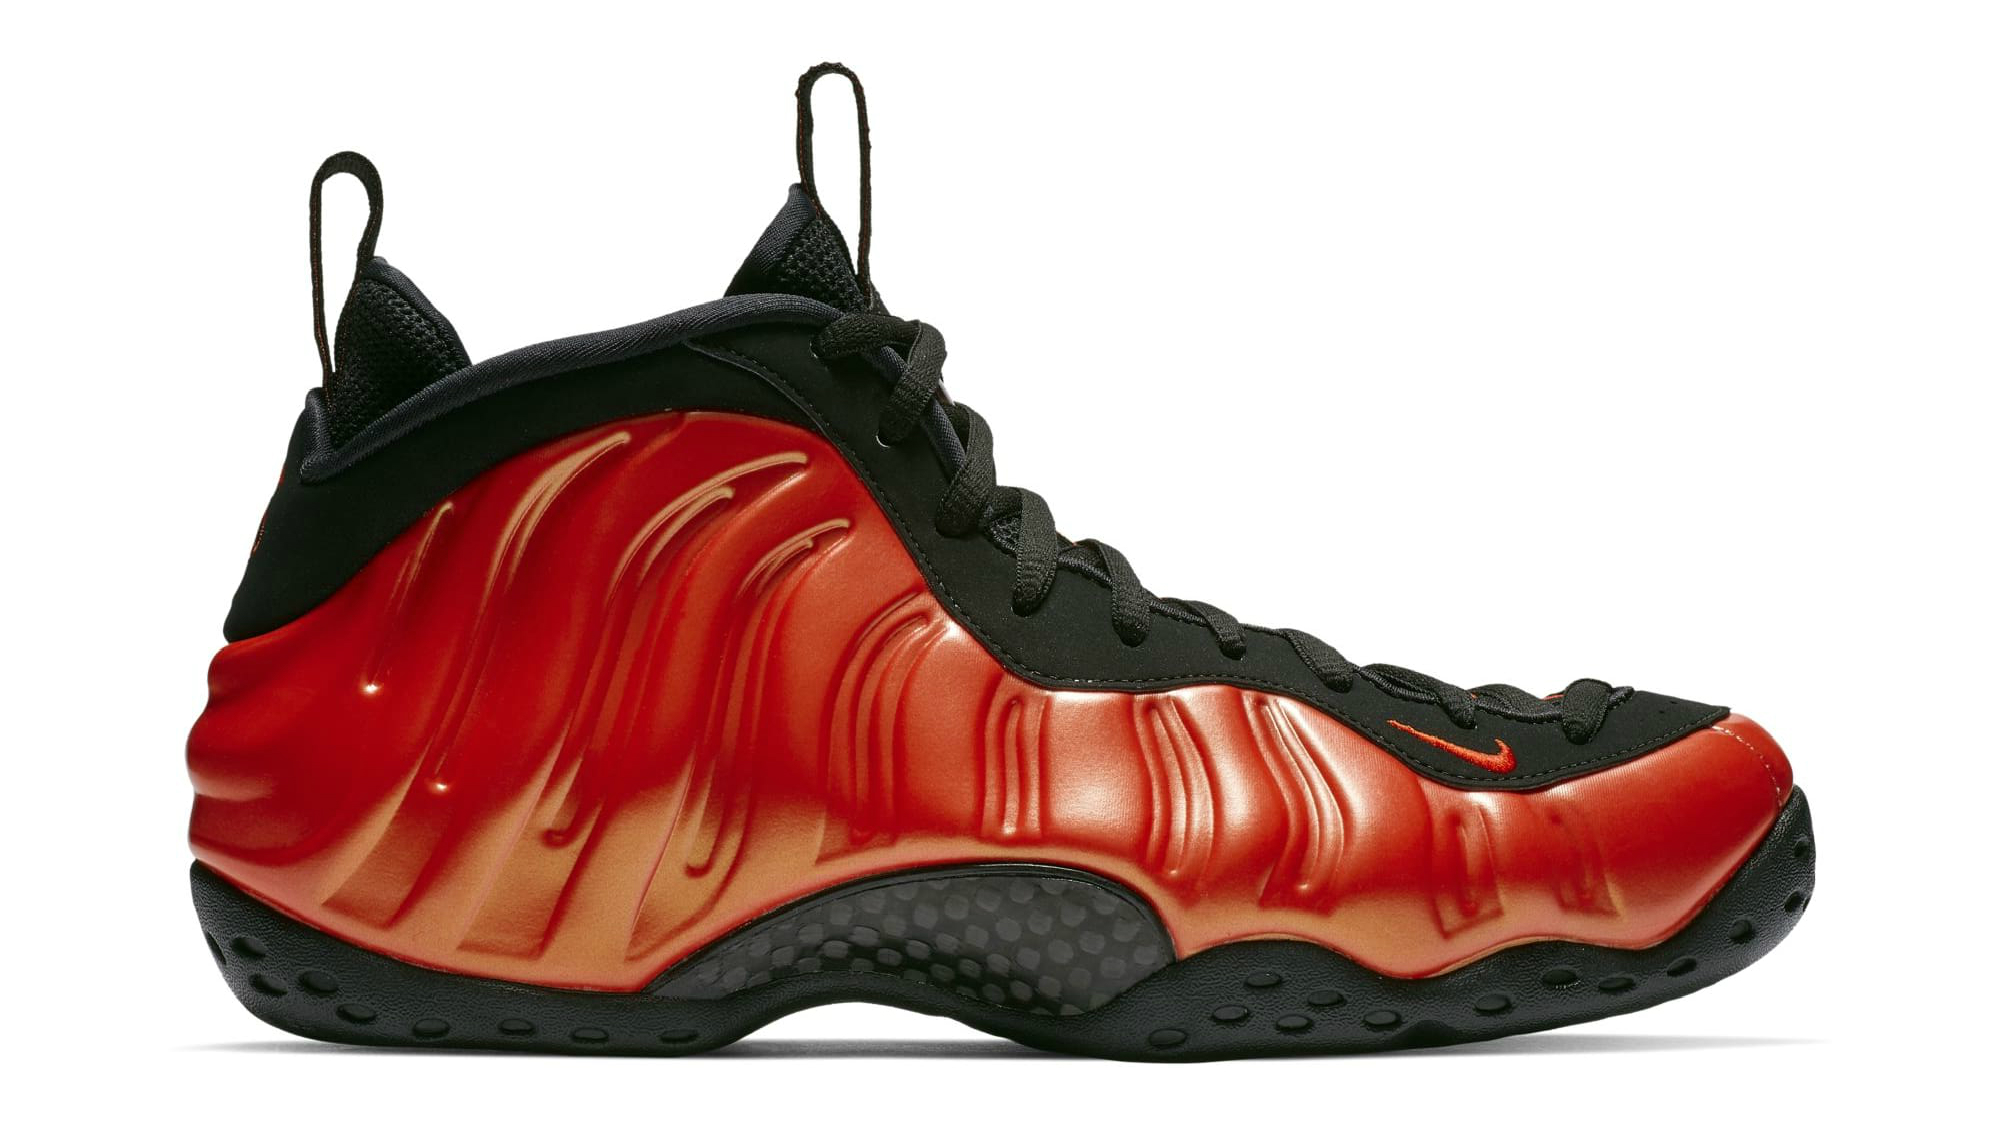 nike air foamposite one habanero red 314996 604 release date